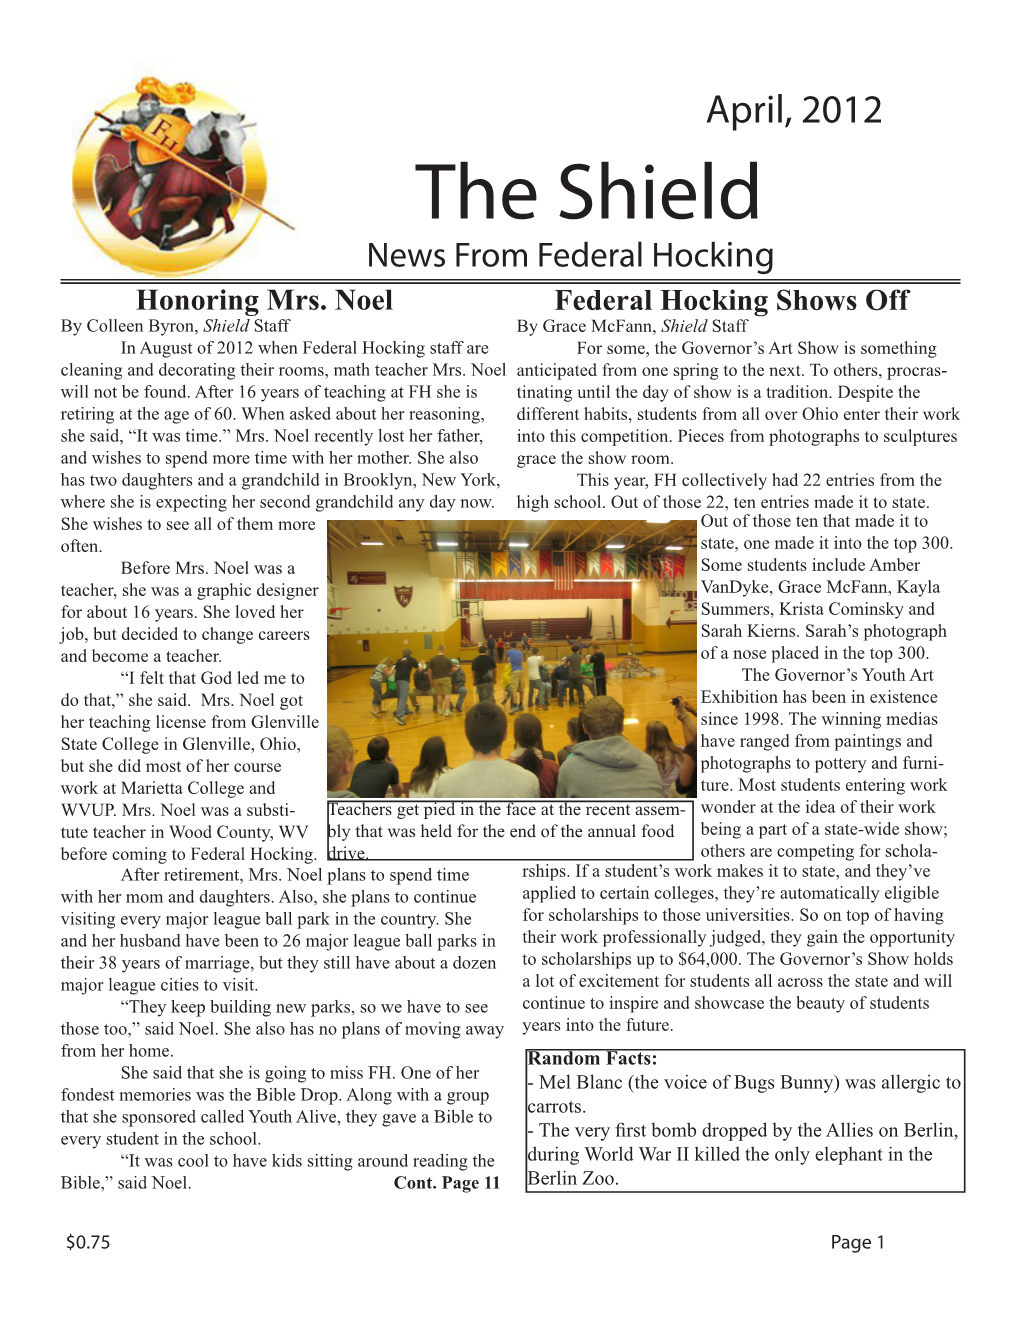 The Shield News from Federal Hocking Honoring Mrs